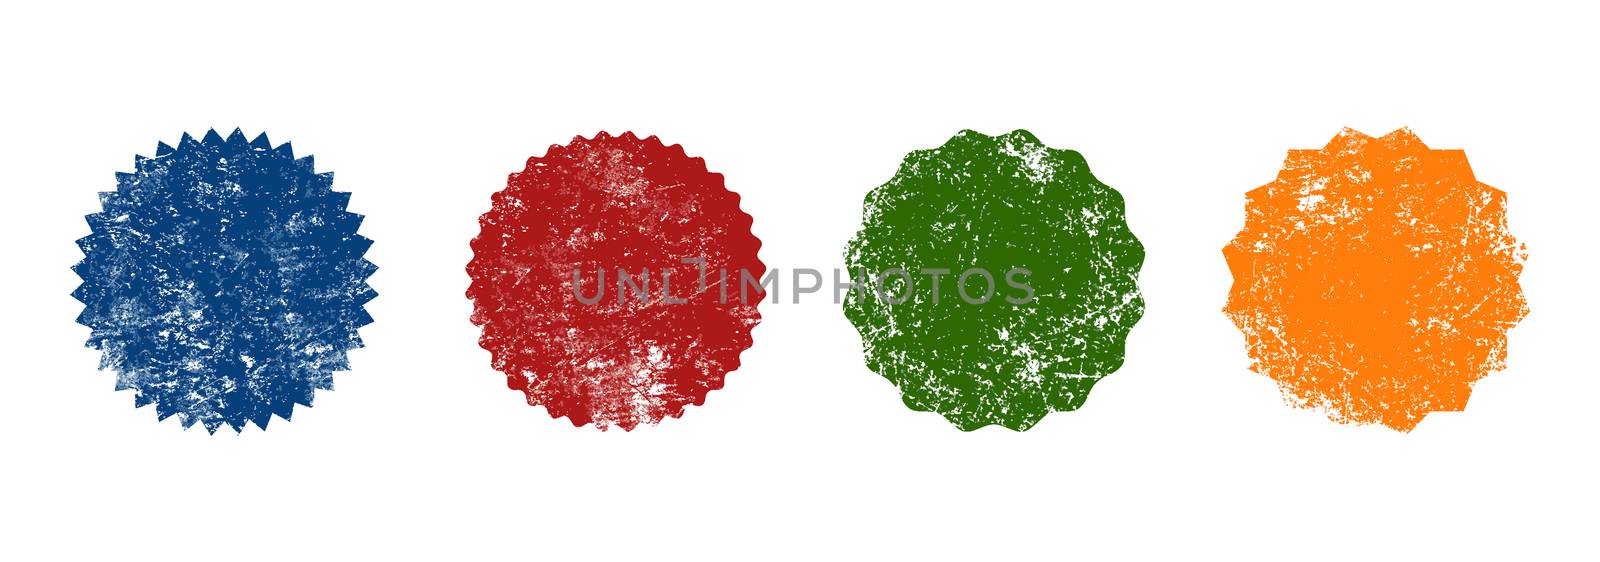 Close up for different colorful retro seal grunge stamp badge shapes isolated on white background